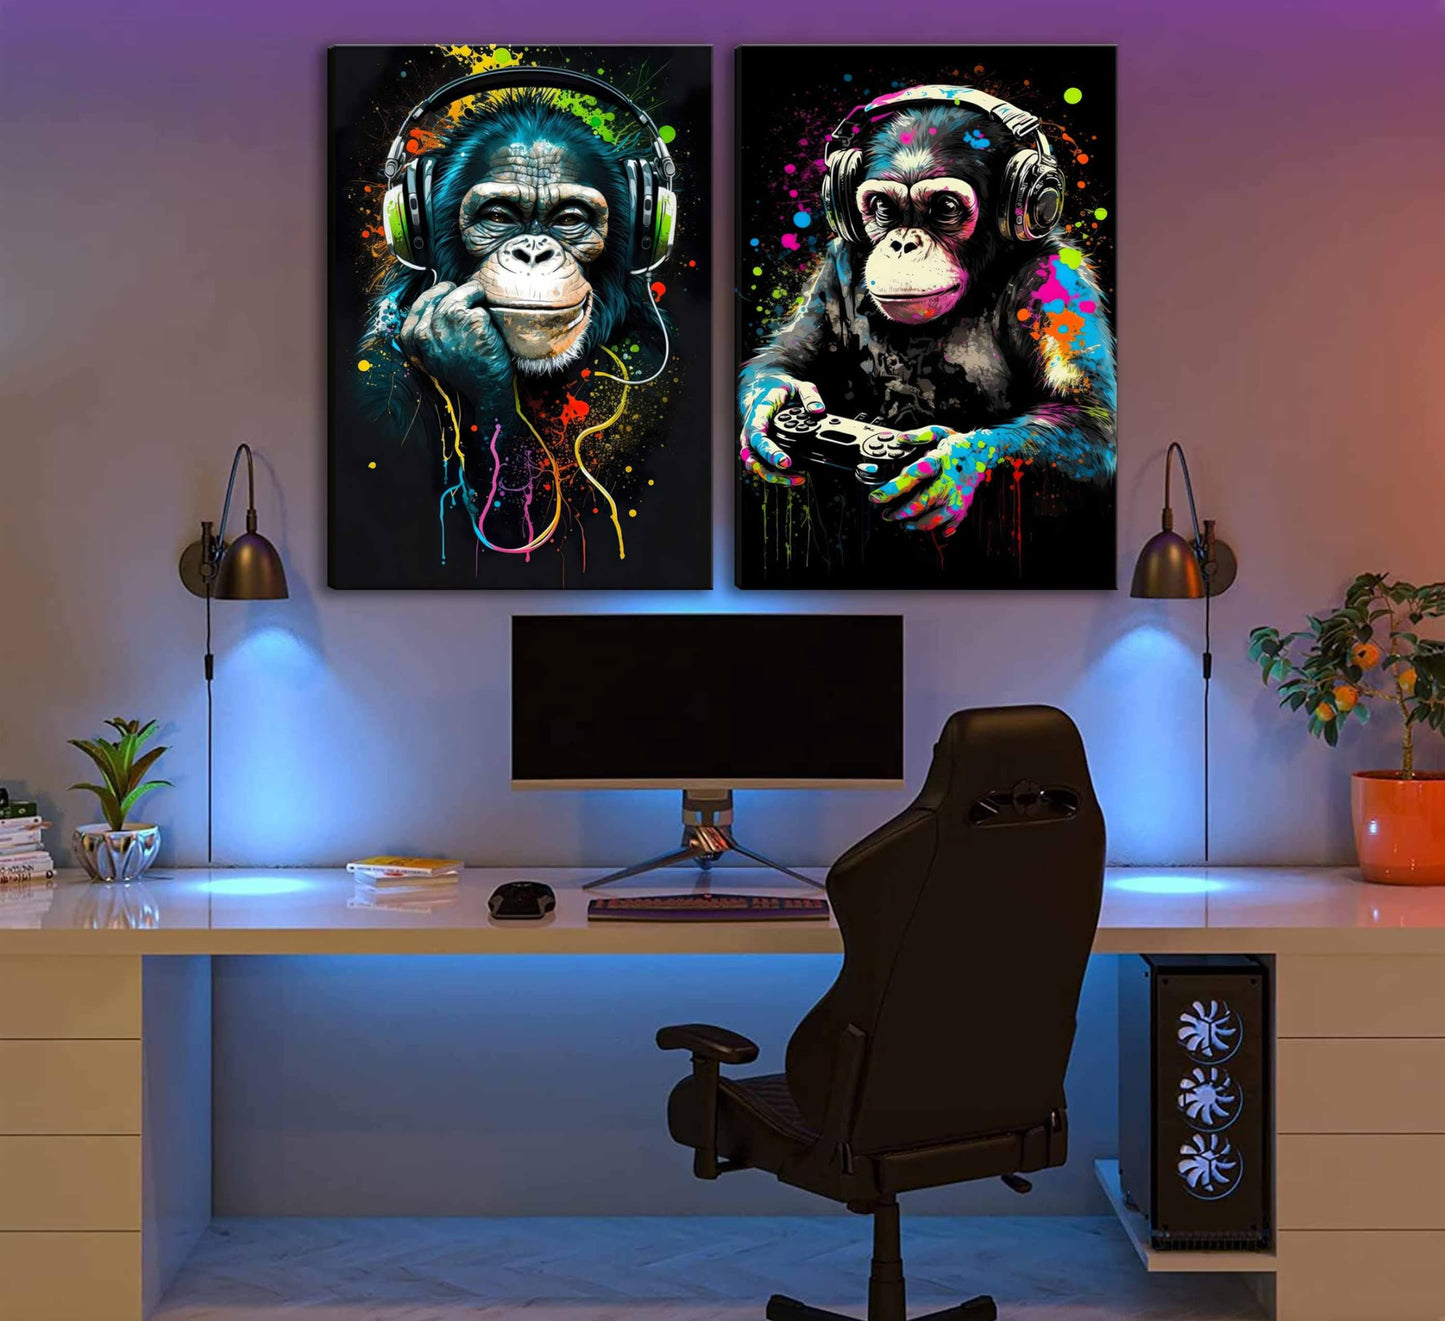 Graffiti Gaming Canvas Wall Art Game Room Decor Boys Gamer Controller Poster Animals Vintage Watercolor Cool Music Chimpanzee Pictures Painting Boys teeny Room Kids Game for Room Bedroom Decoration